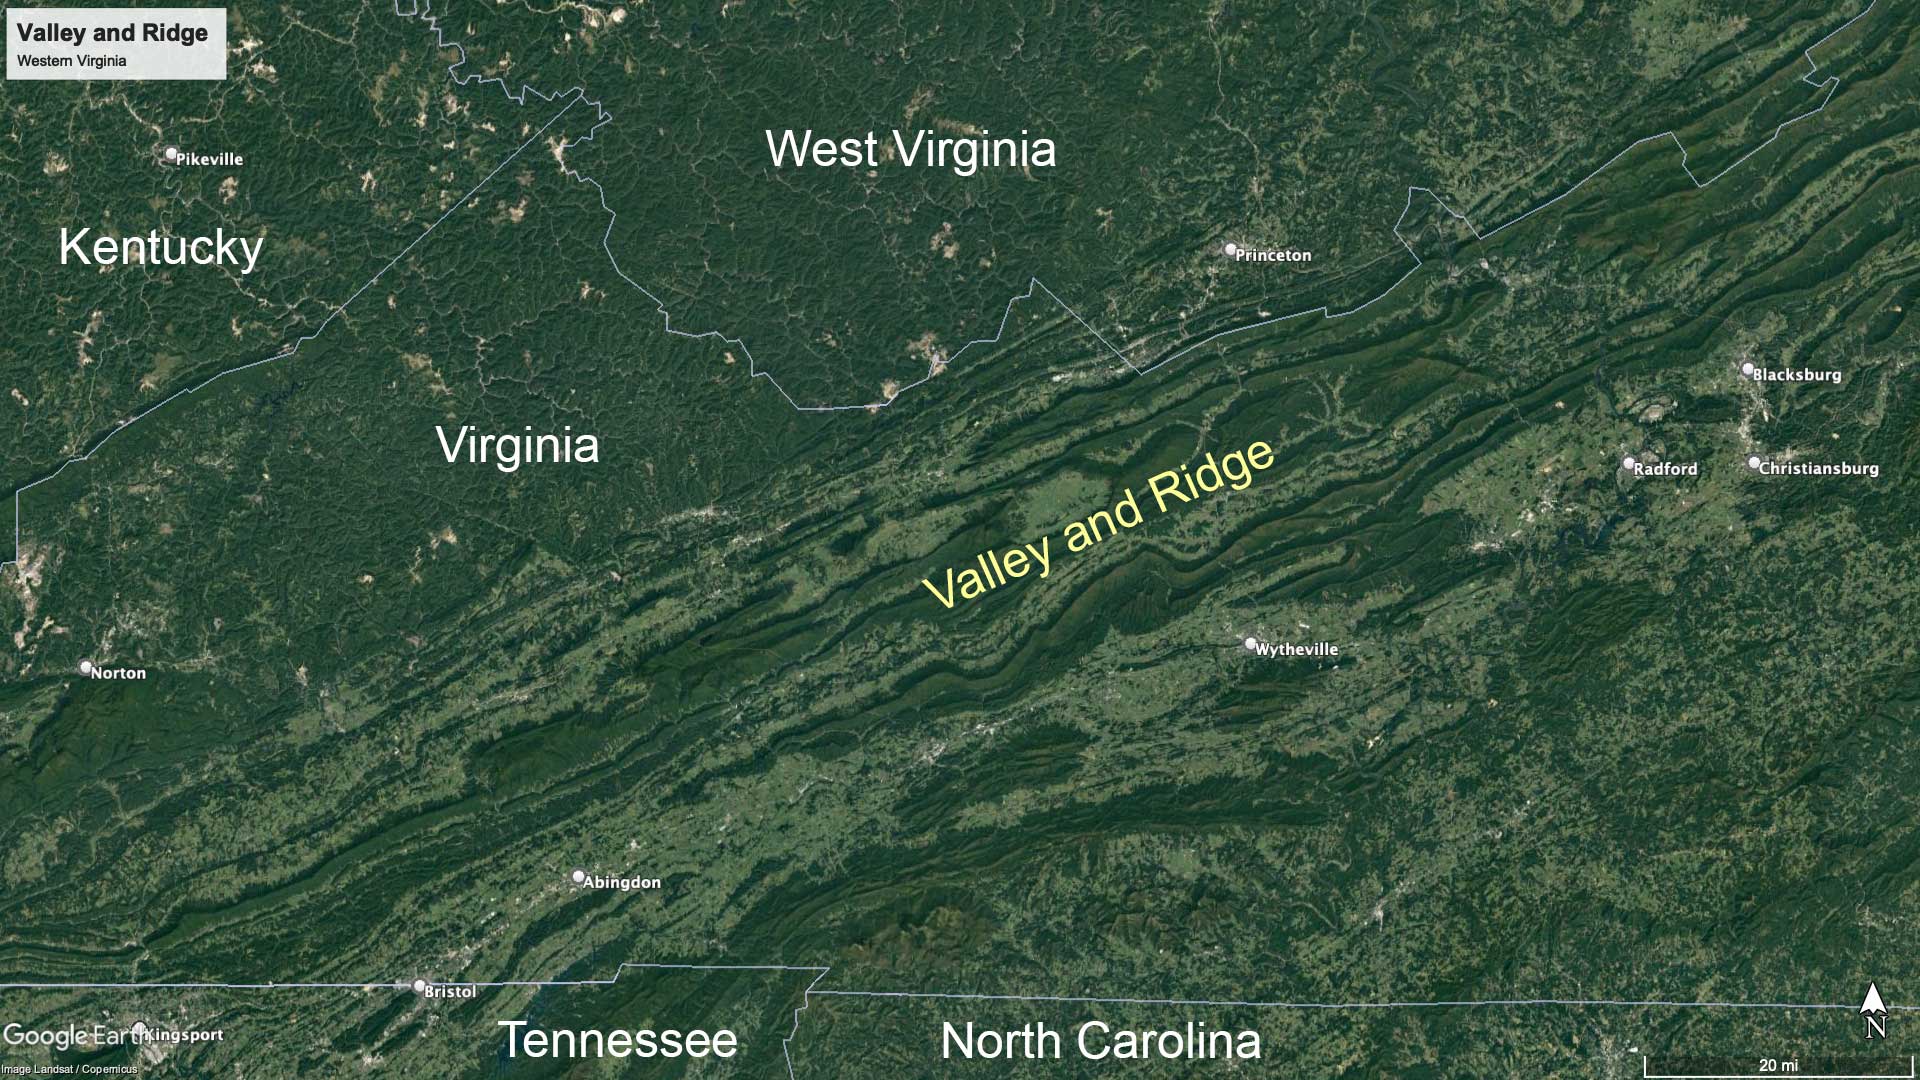 Map showing the Valley and Ridge system in western Virginia.